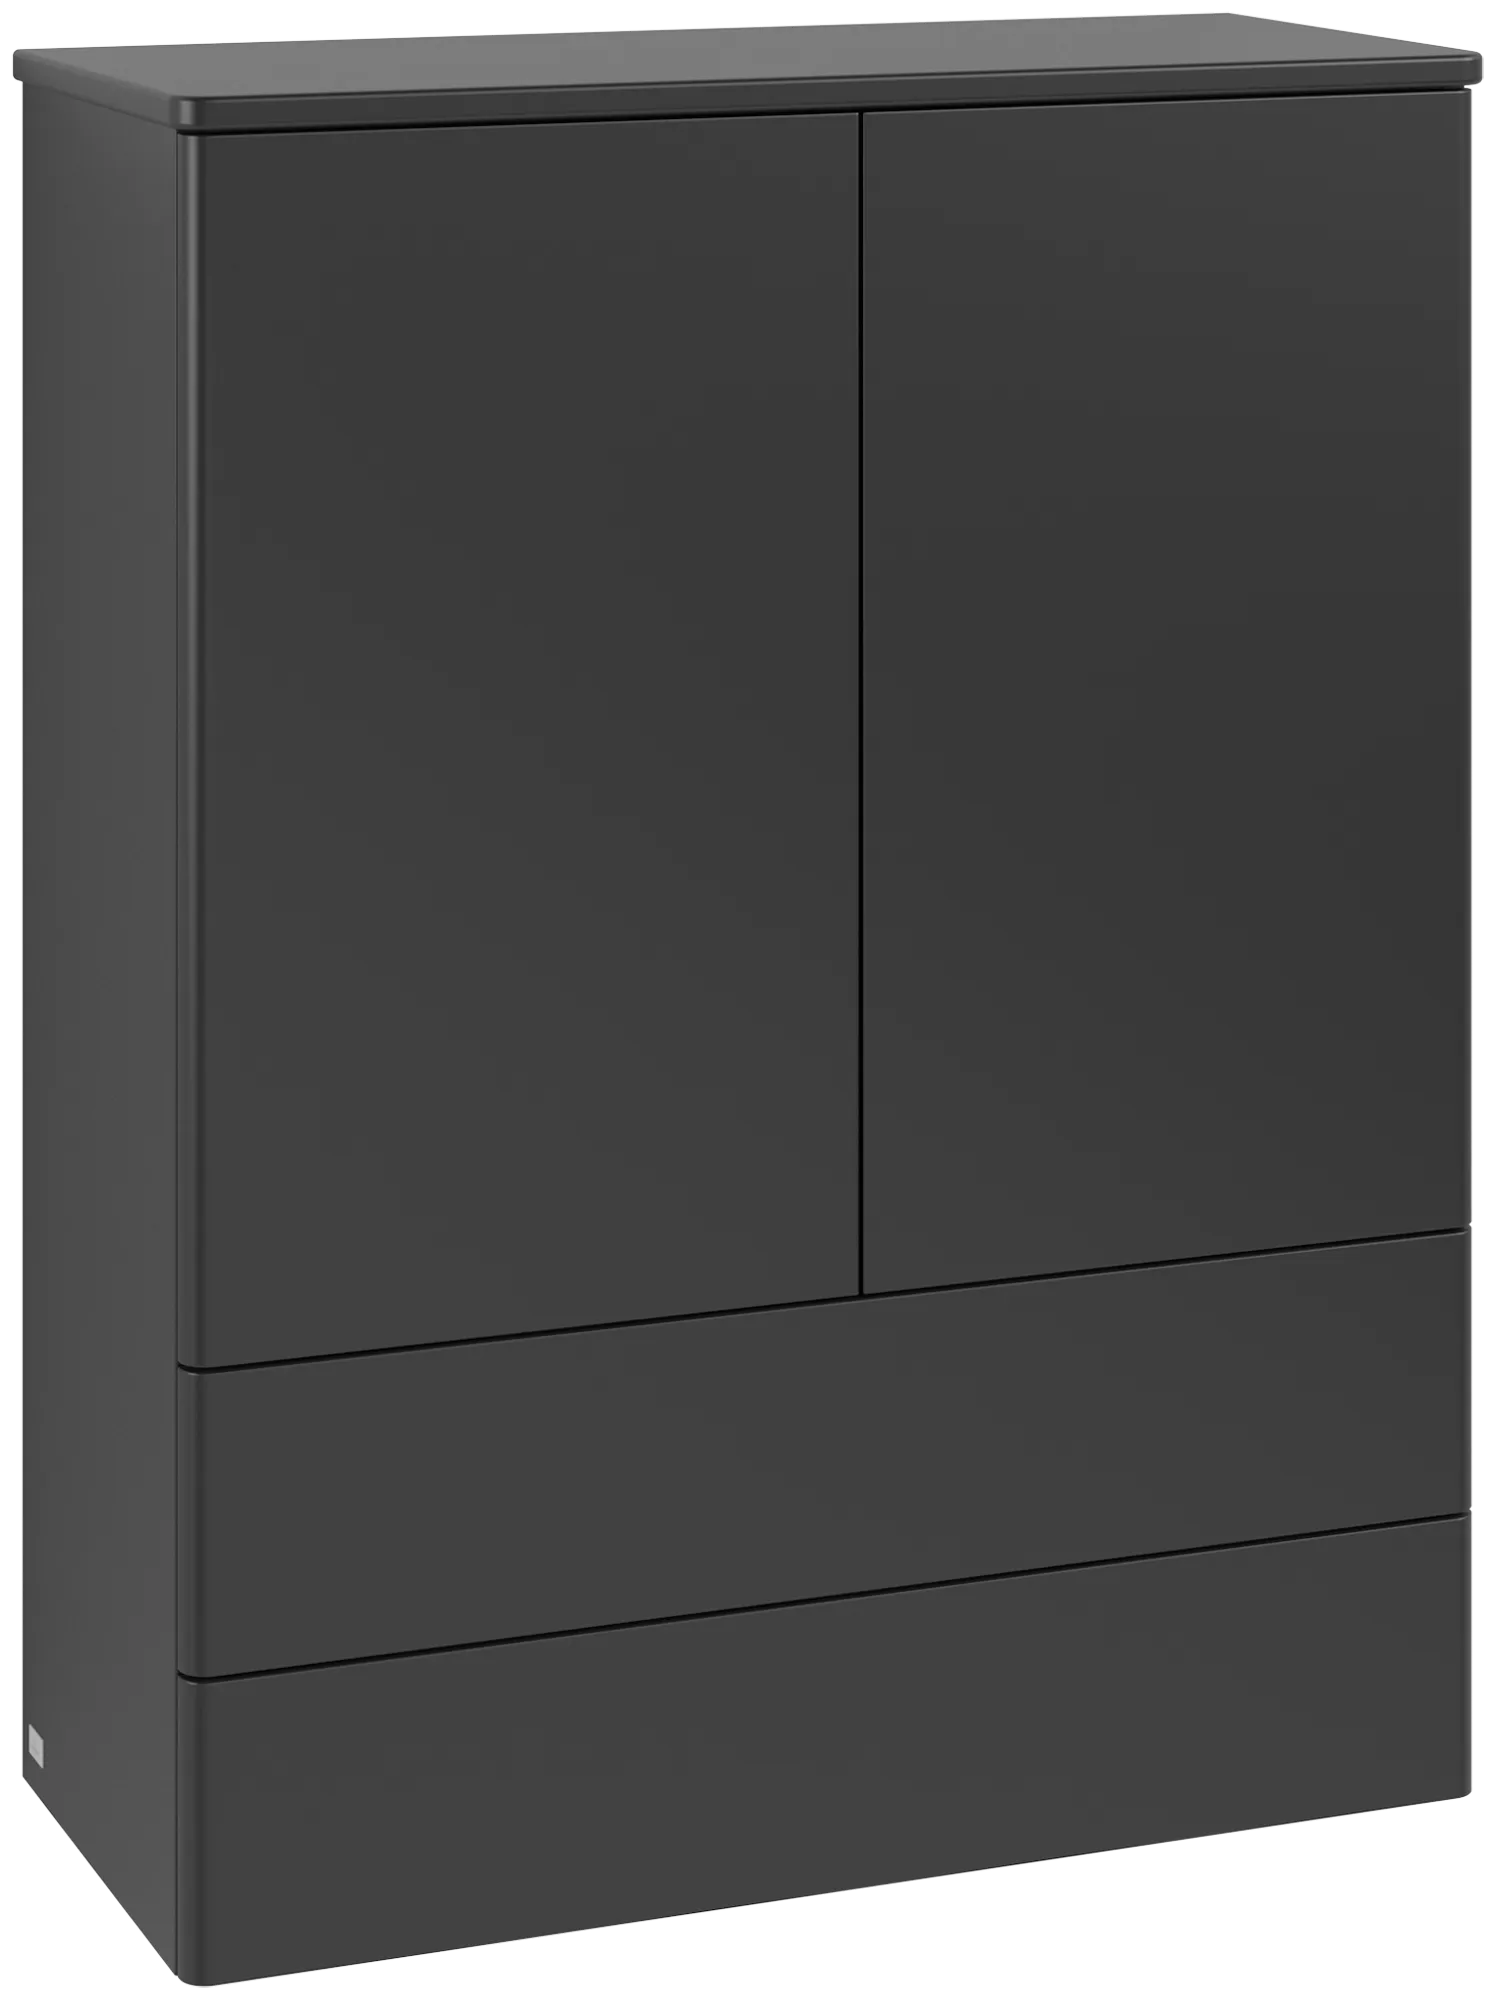 VILLEROY BOCH Antao Highboard, with lighting, 2 doors, 814 x 1039 x 356 mm, Front without structure, Black Matt Lacquer / Black Matt Lacquer #L47000PD resmi